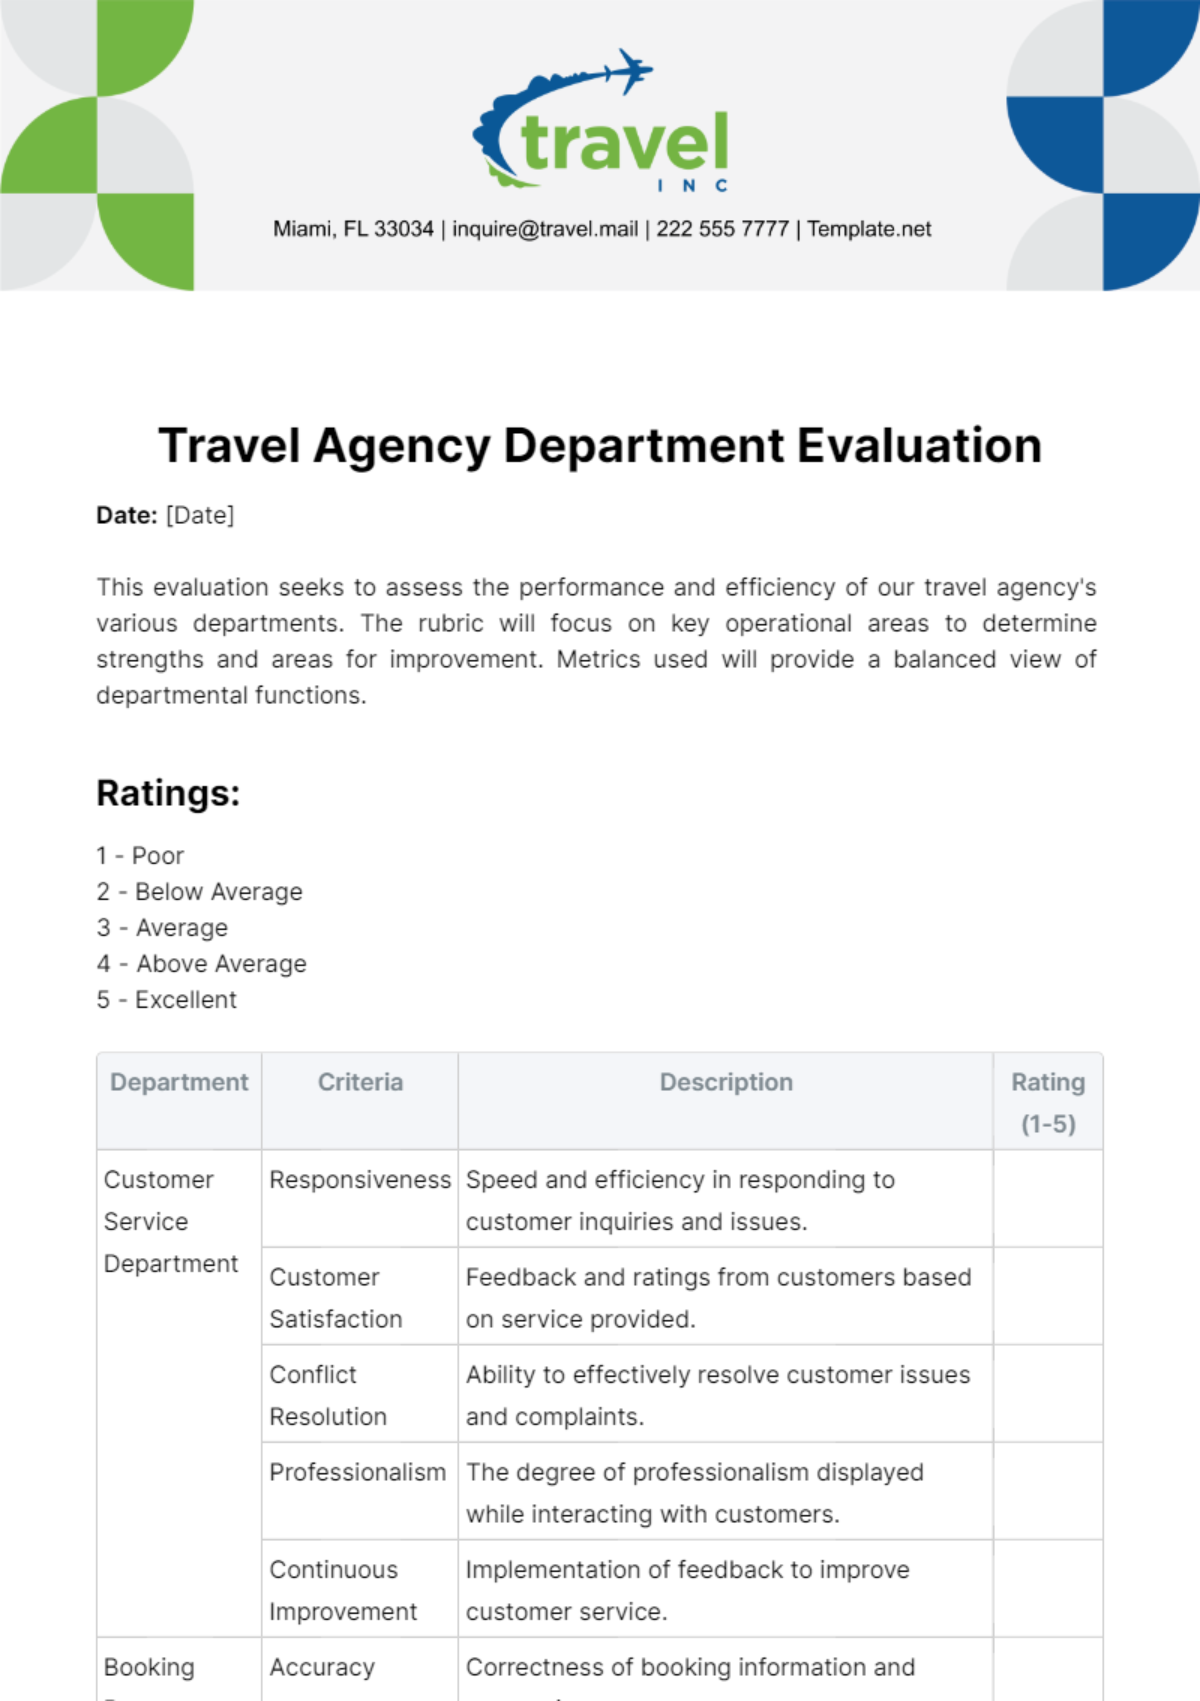 Free Travel Agency Department Evaluation Template